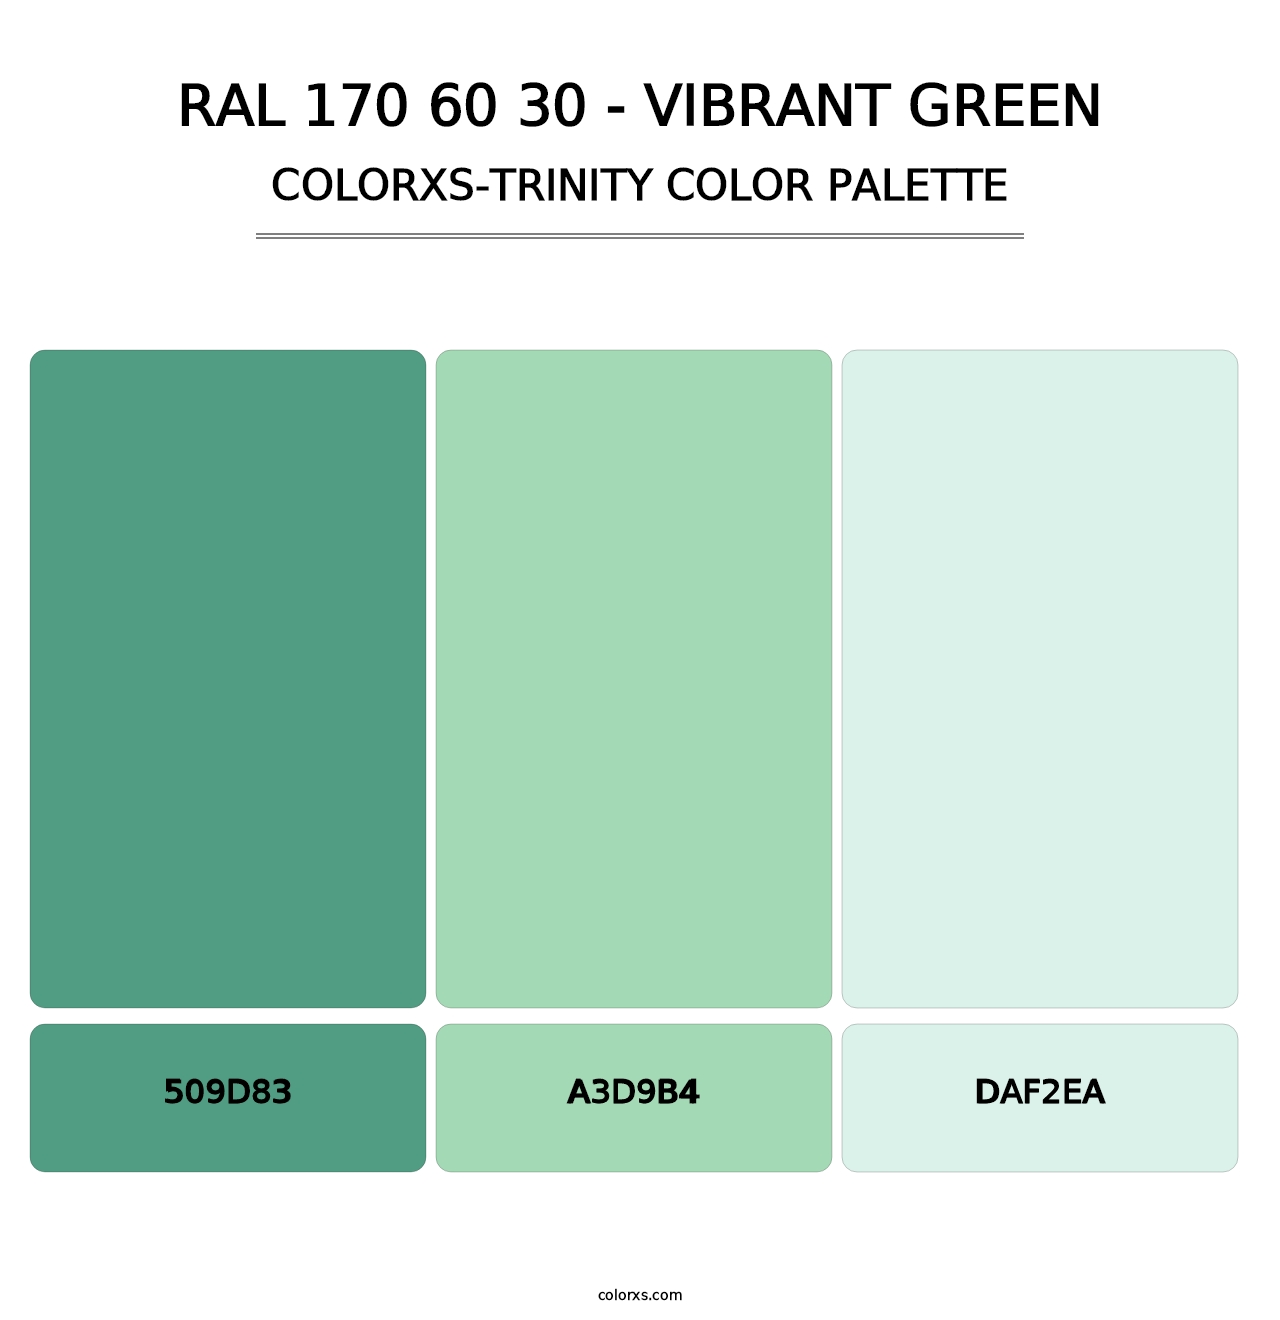 RAL 170 60 30 - Vibrant Green - Colorxs Trinity Palette